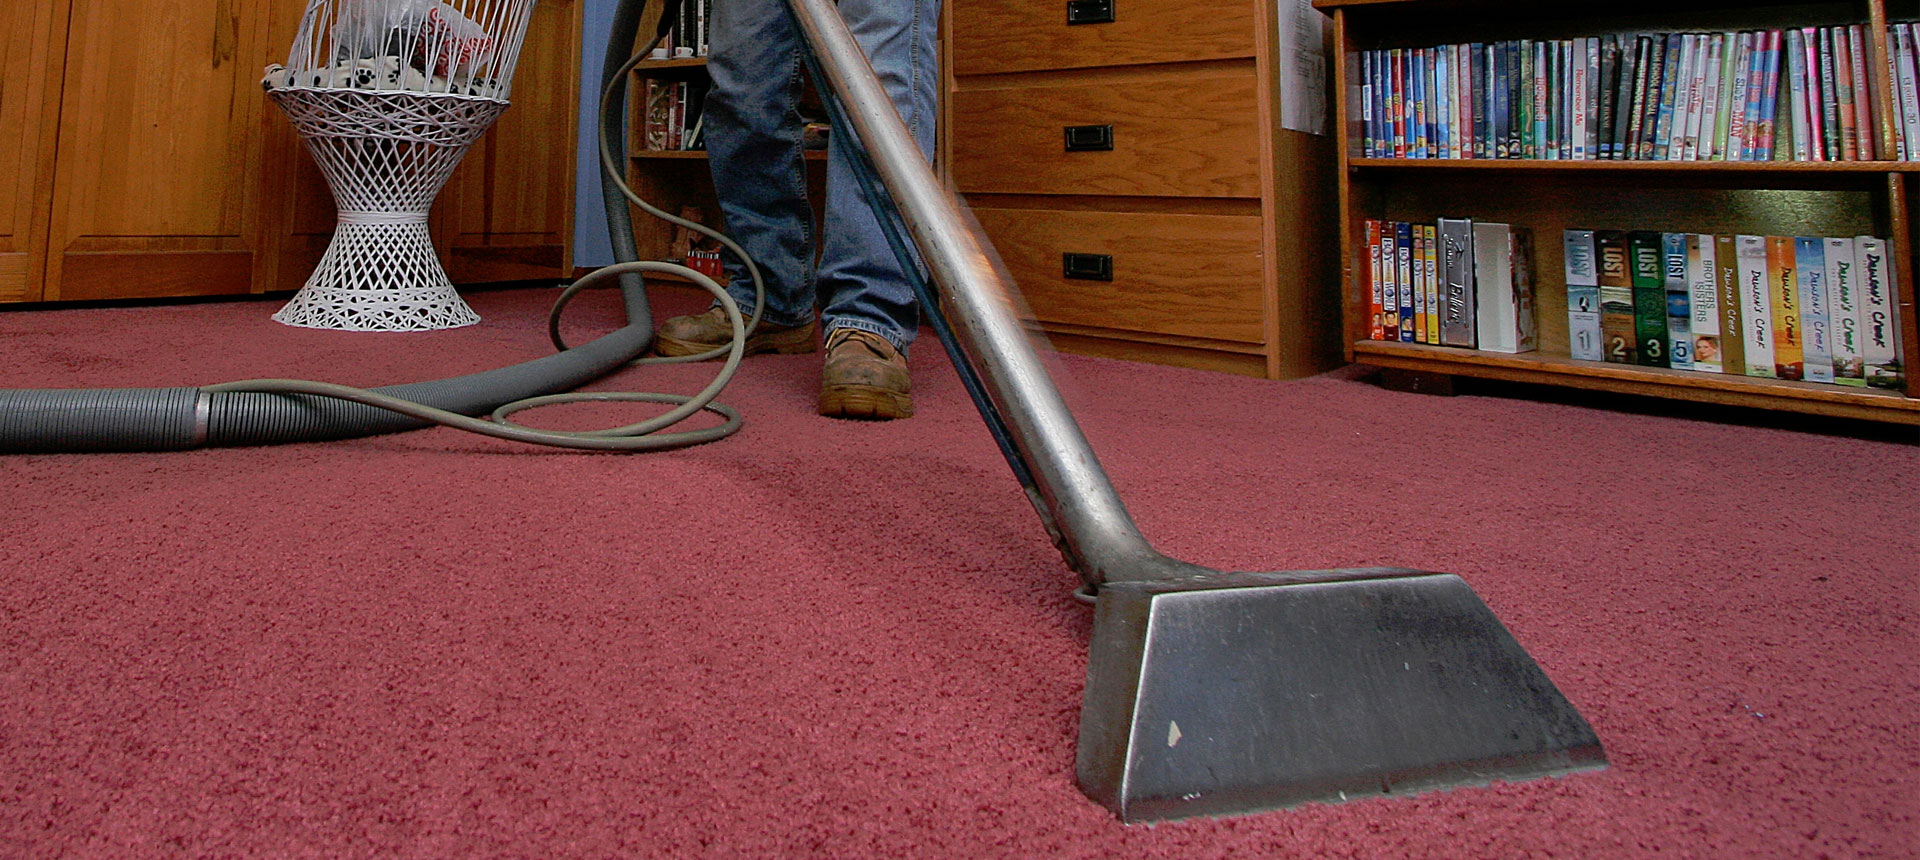 Carpet & upholstery Cleaning Services Maryland